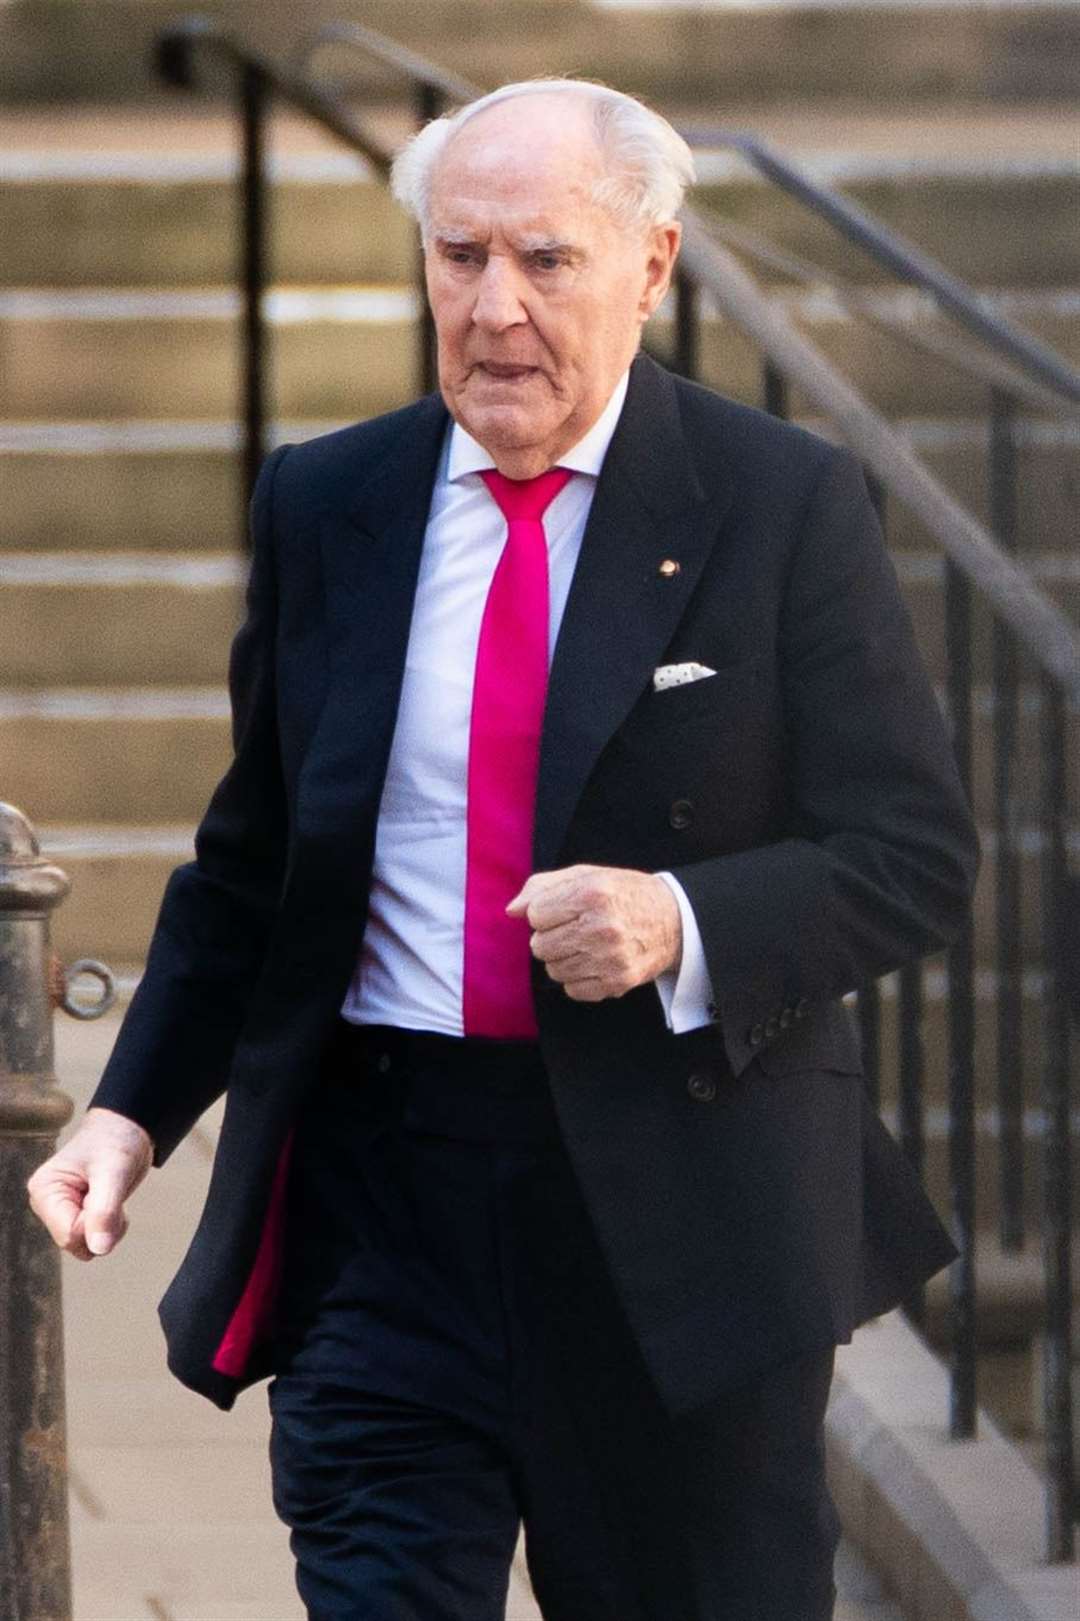 Sir Frederick Barclay was attending the High Court in London (James Manning/PA)